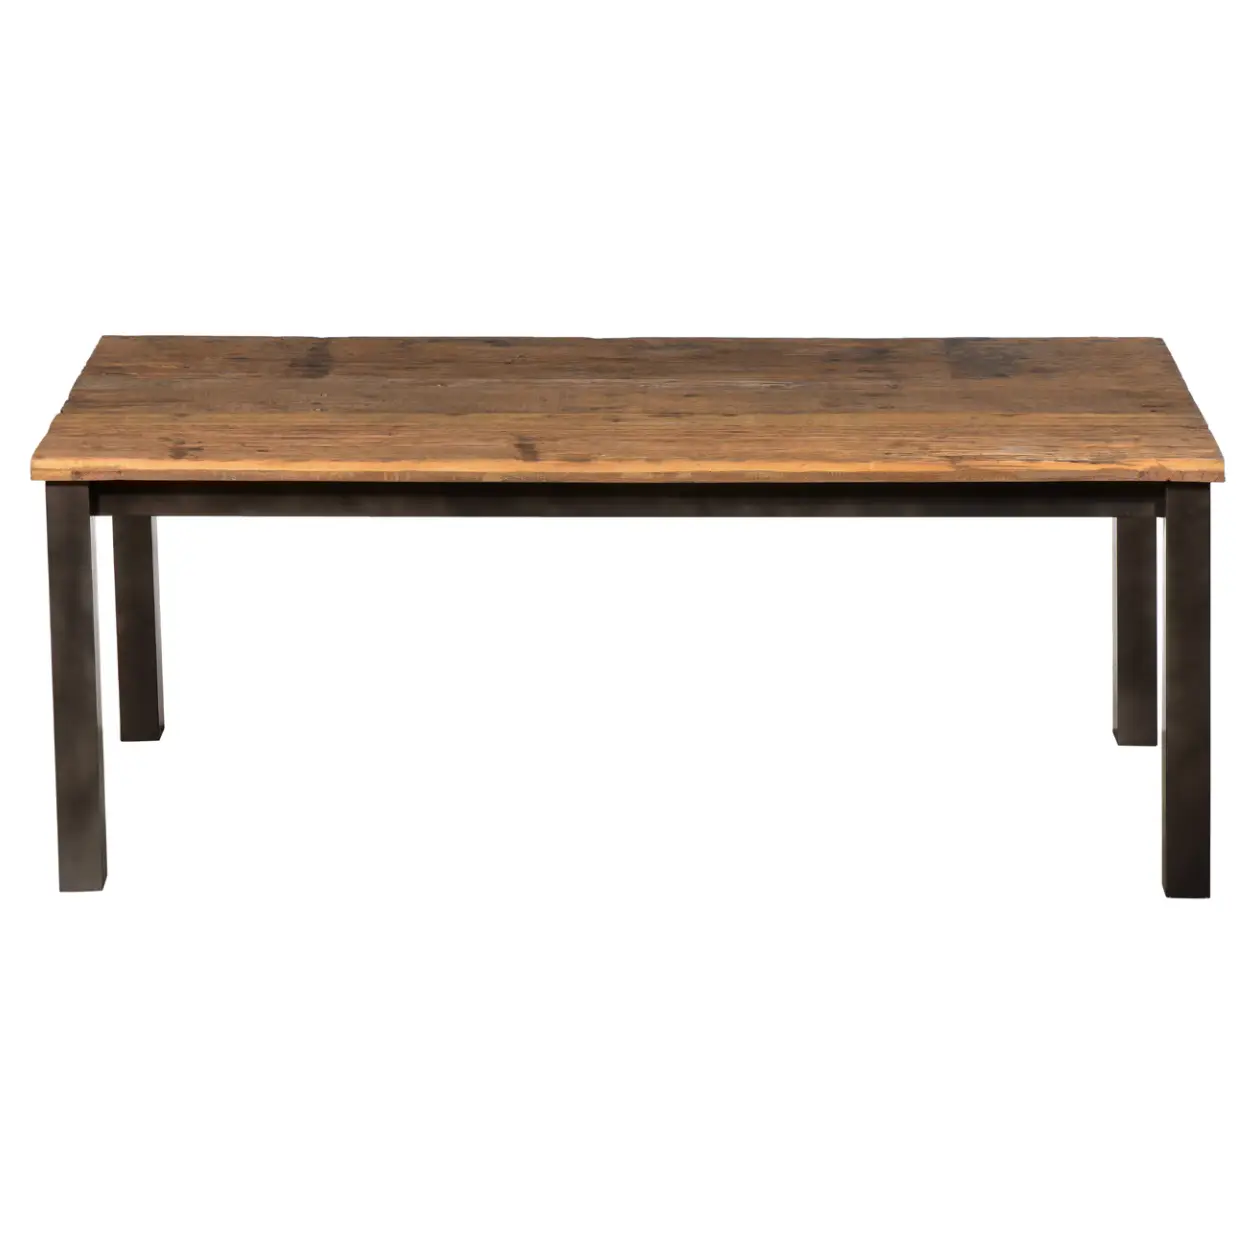 Dining Tokyo wood canyon Table,